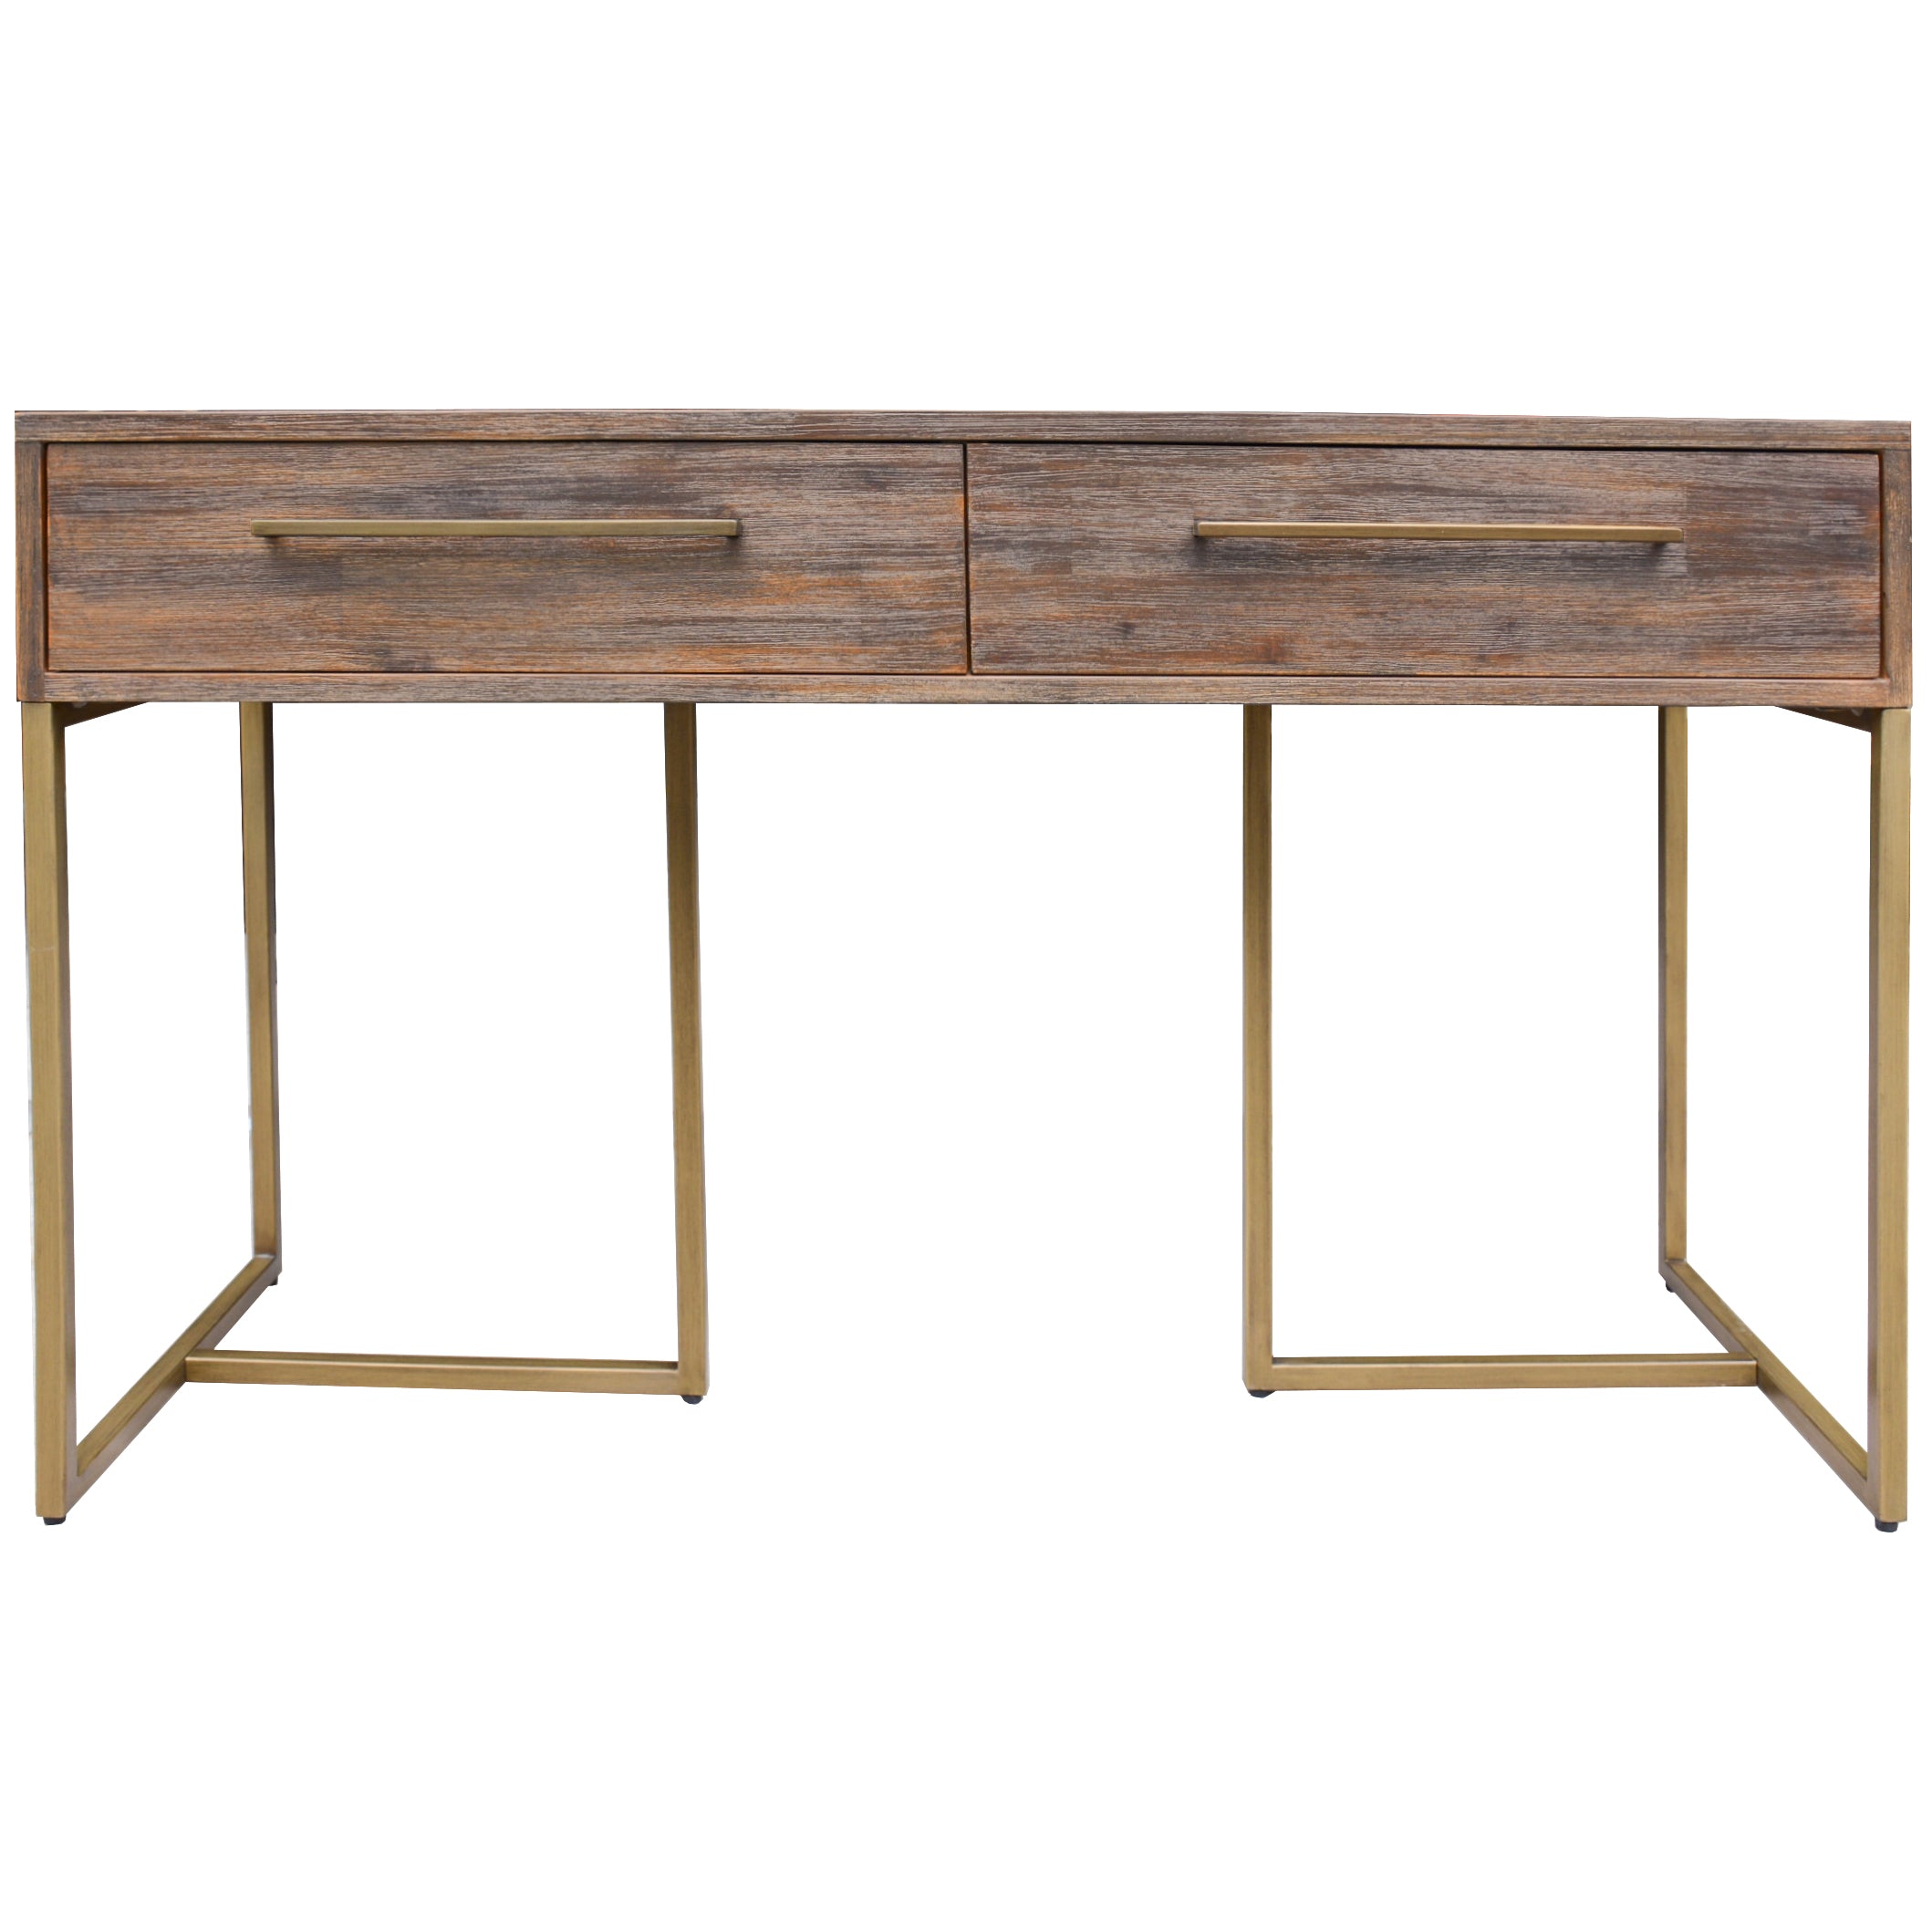 Console Hallway Entry Table 120Cm Solid Acacia Timber Wood - Brown